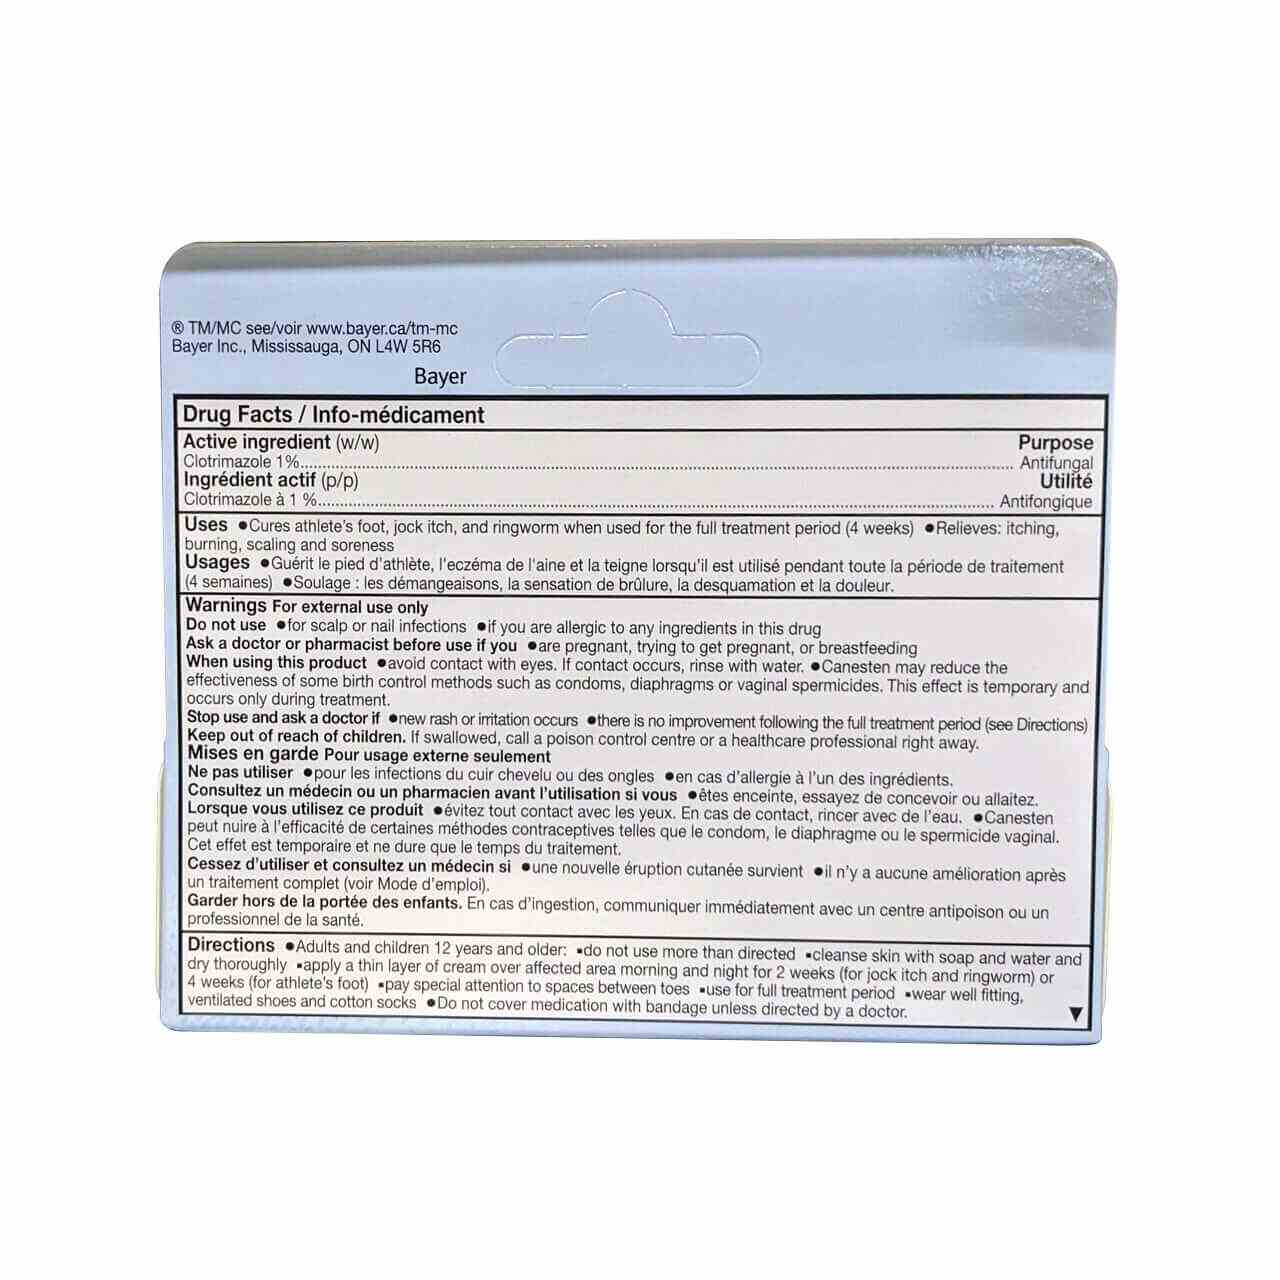 Ingredients, uses, warnings, directions for Canesten Antifungal Cream (Clotrimazole 1%) (15 grams)